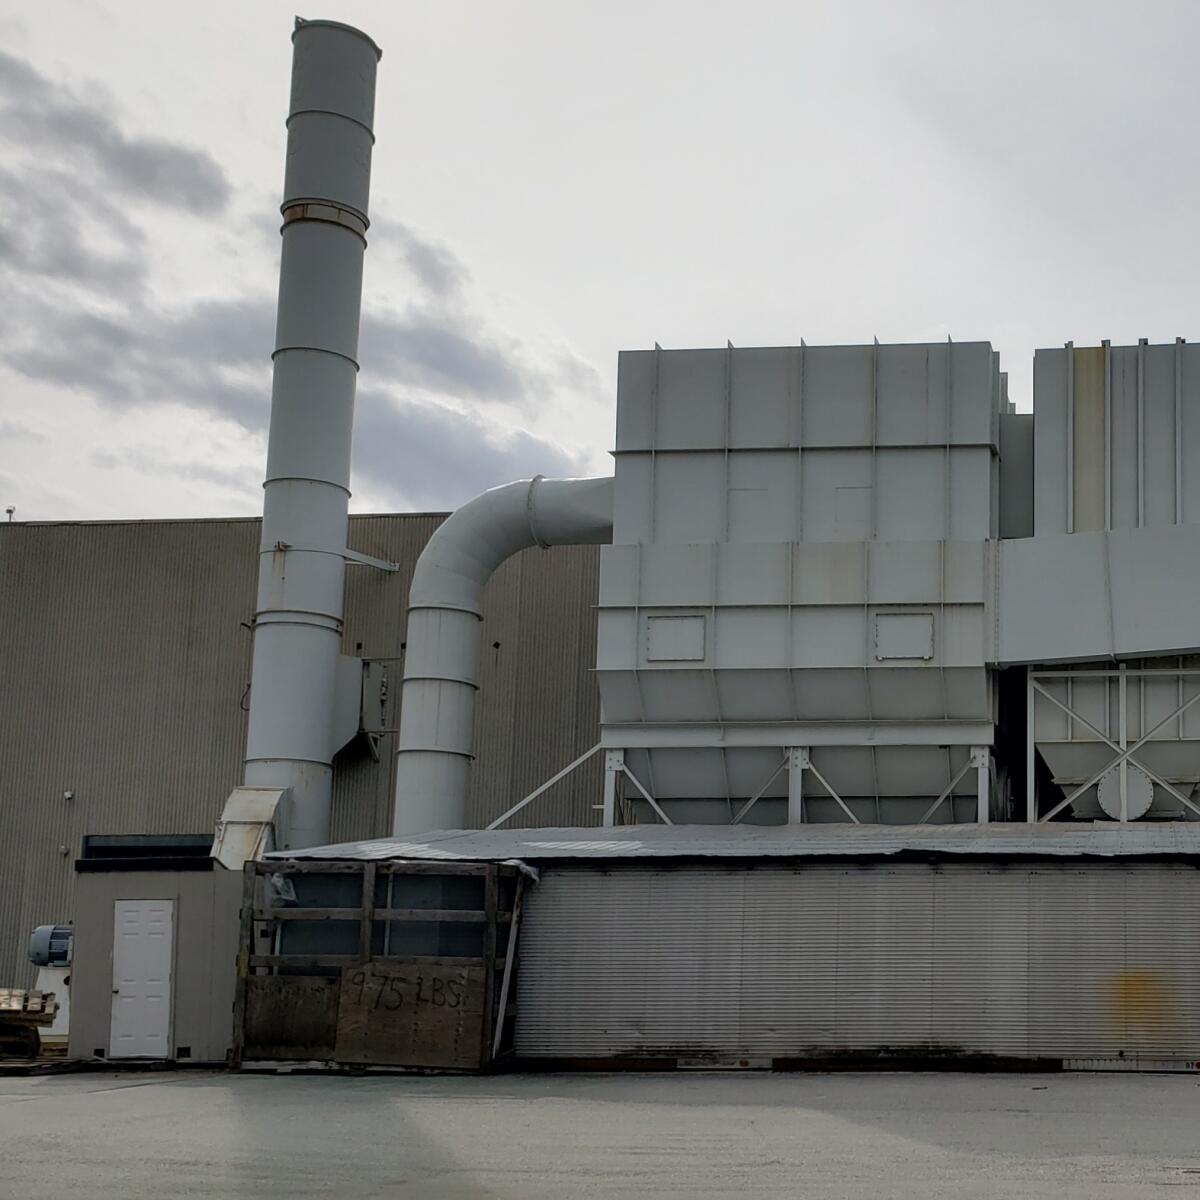 Additional image #1 for 55,000 cfm Bel-tech #30x16 Baghouse Dust Collector